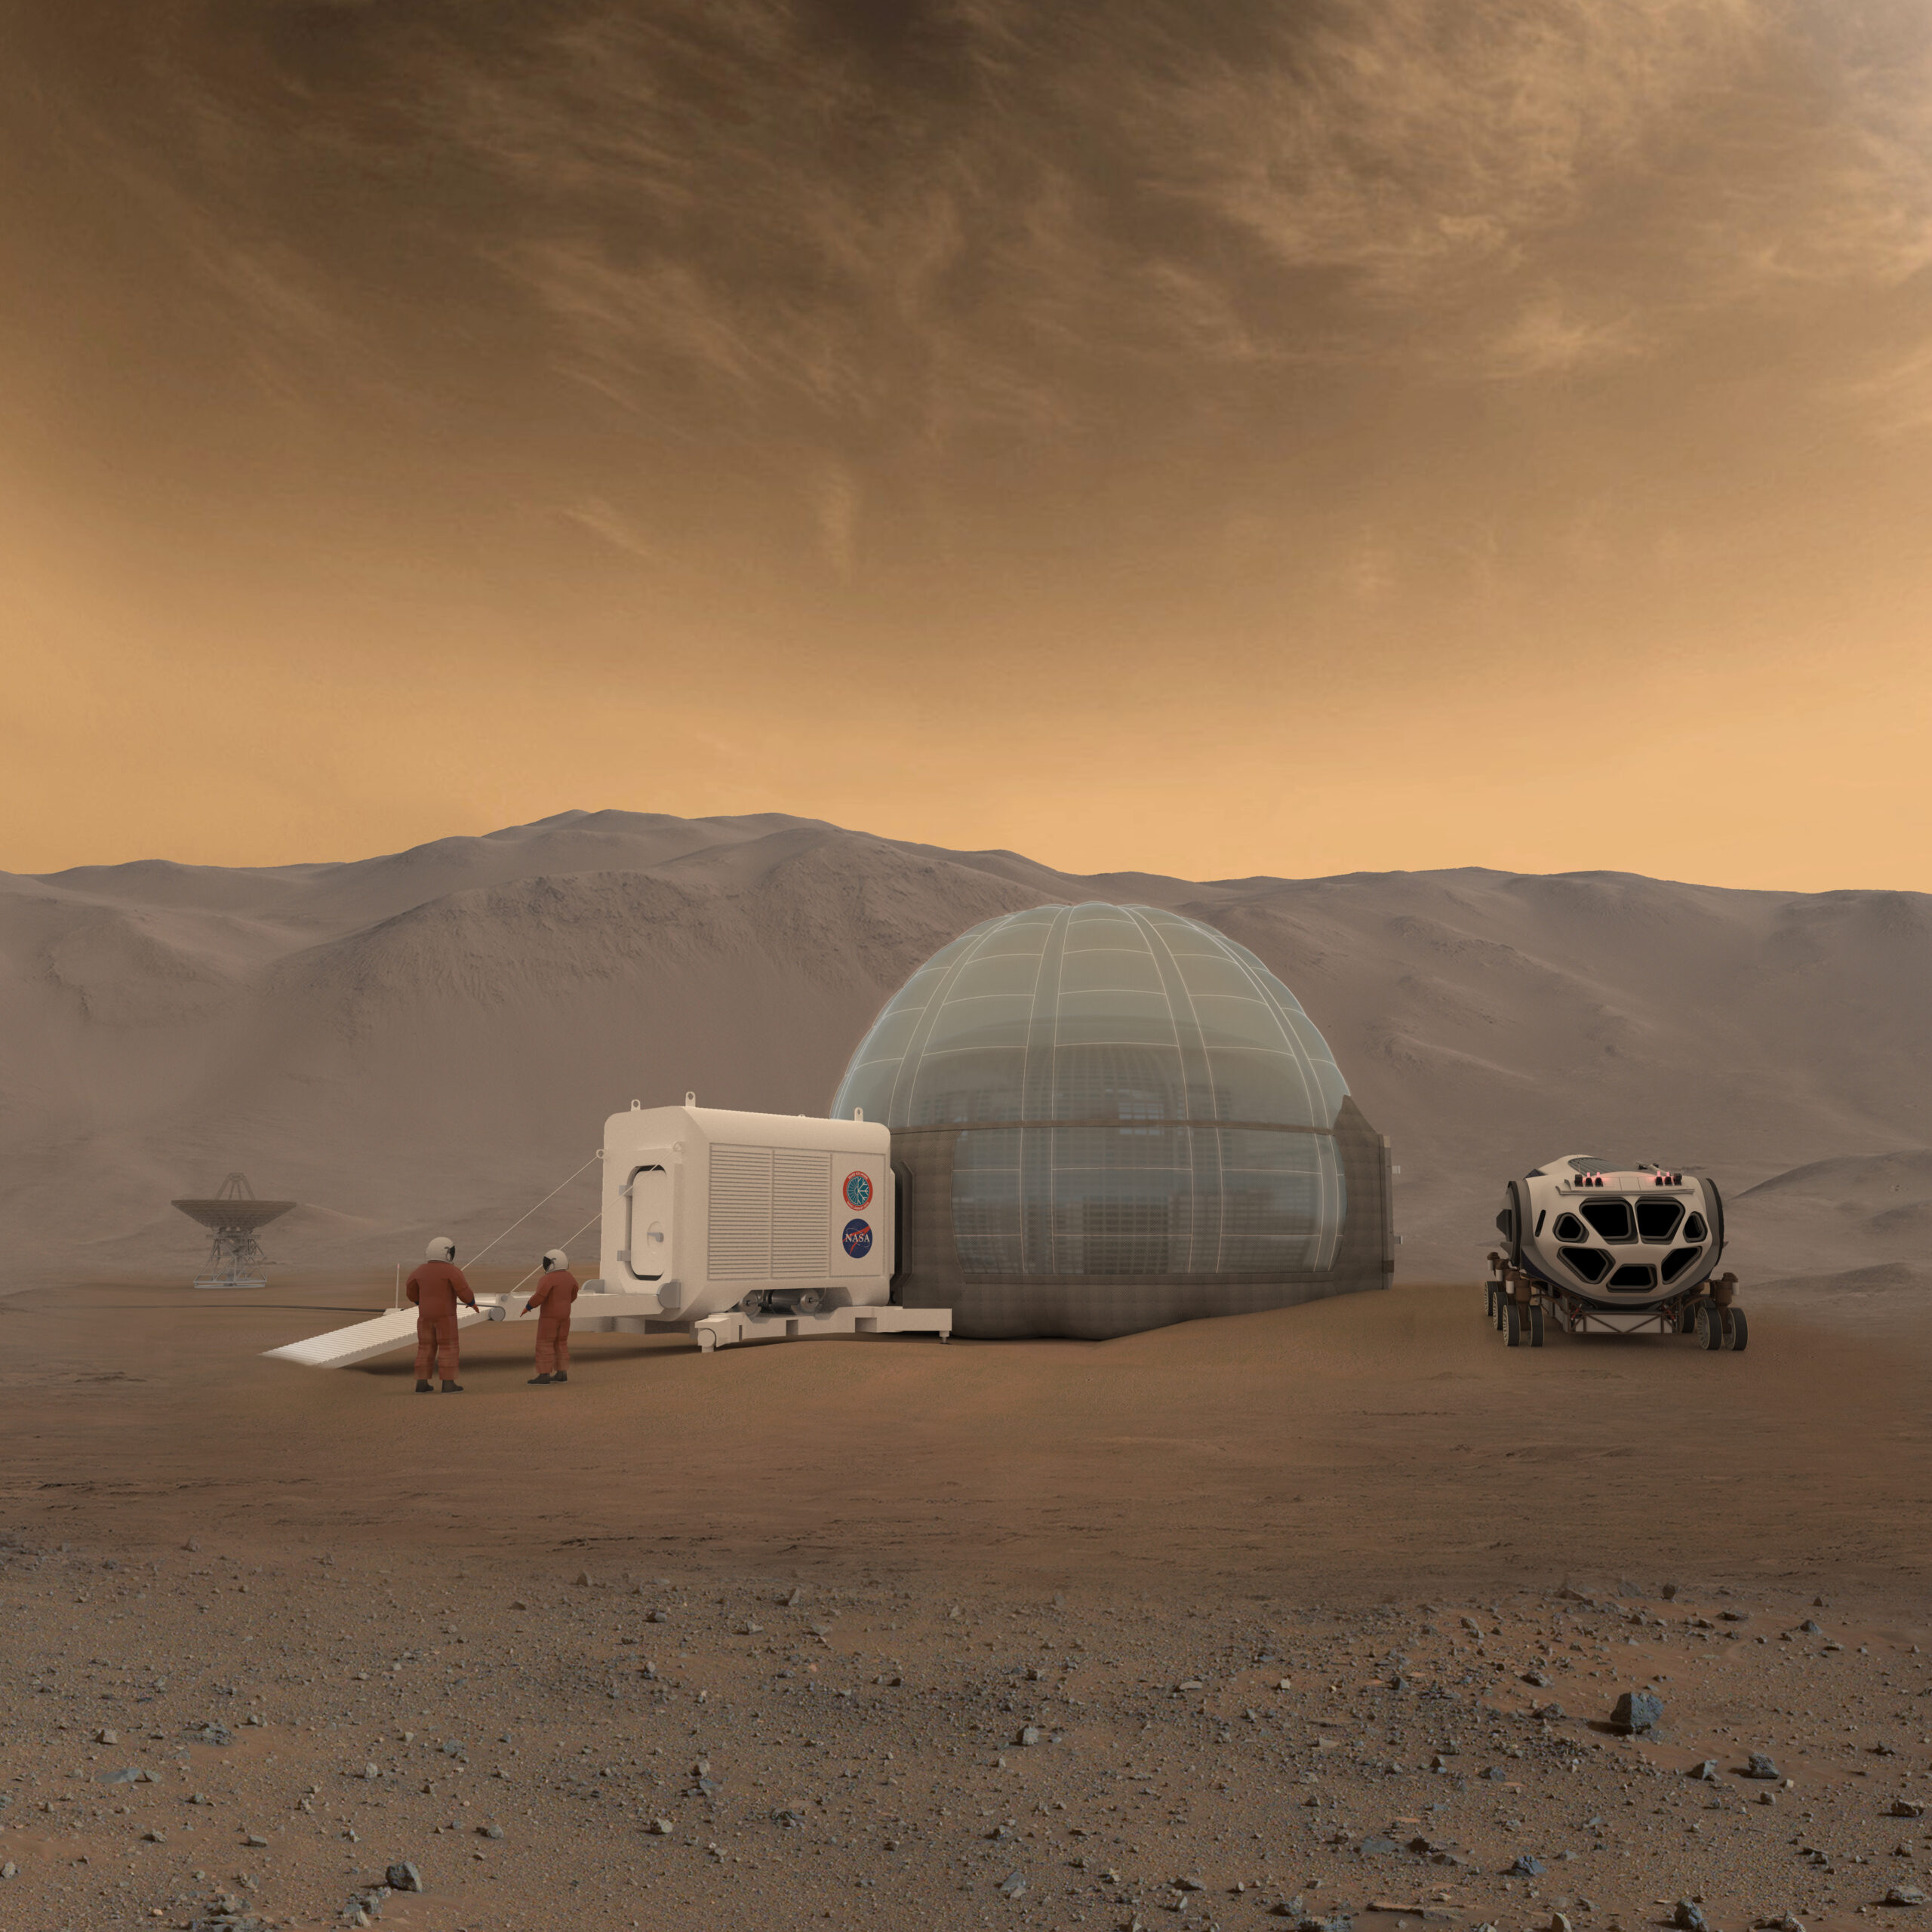 Astronauts could live inside ice domes on Mars